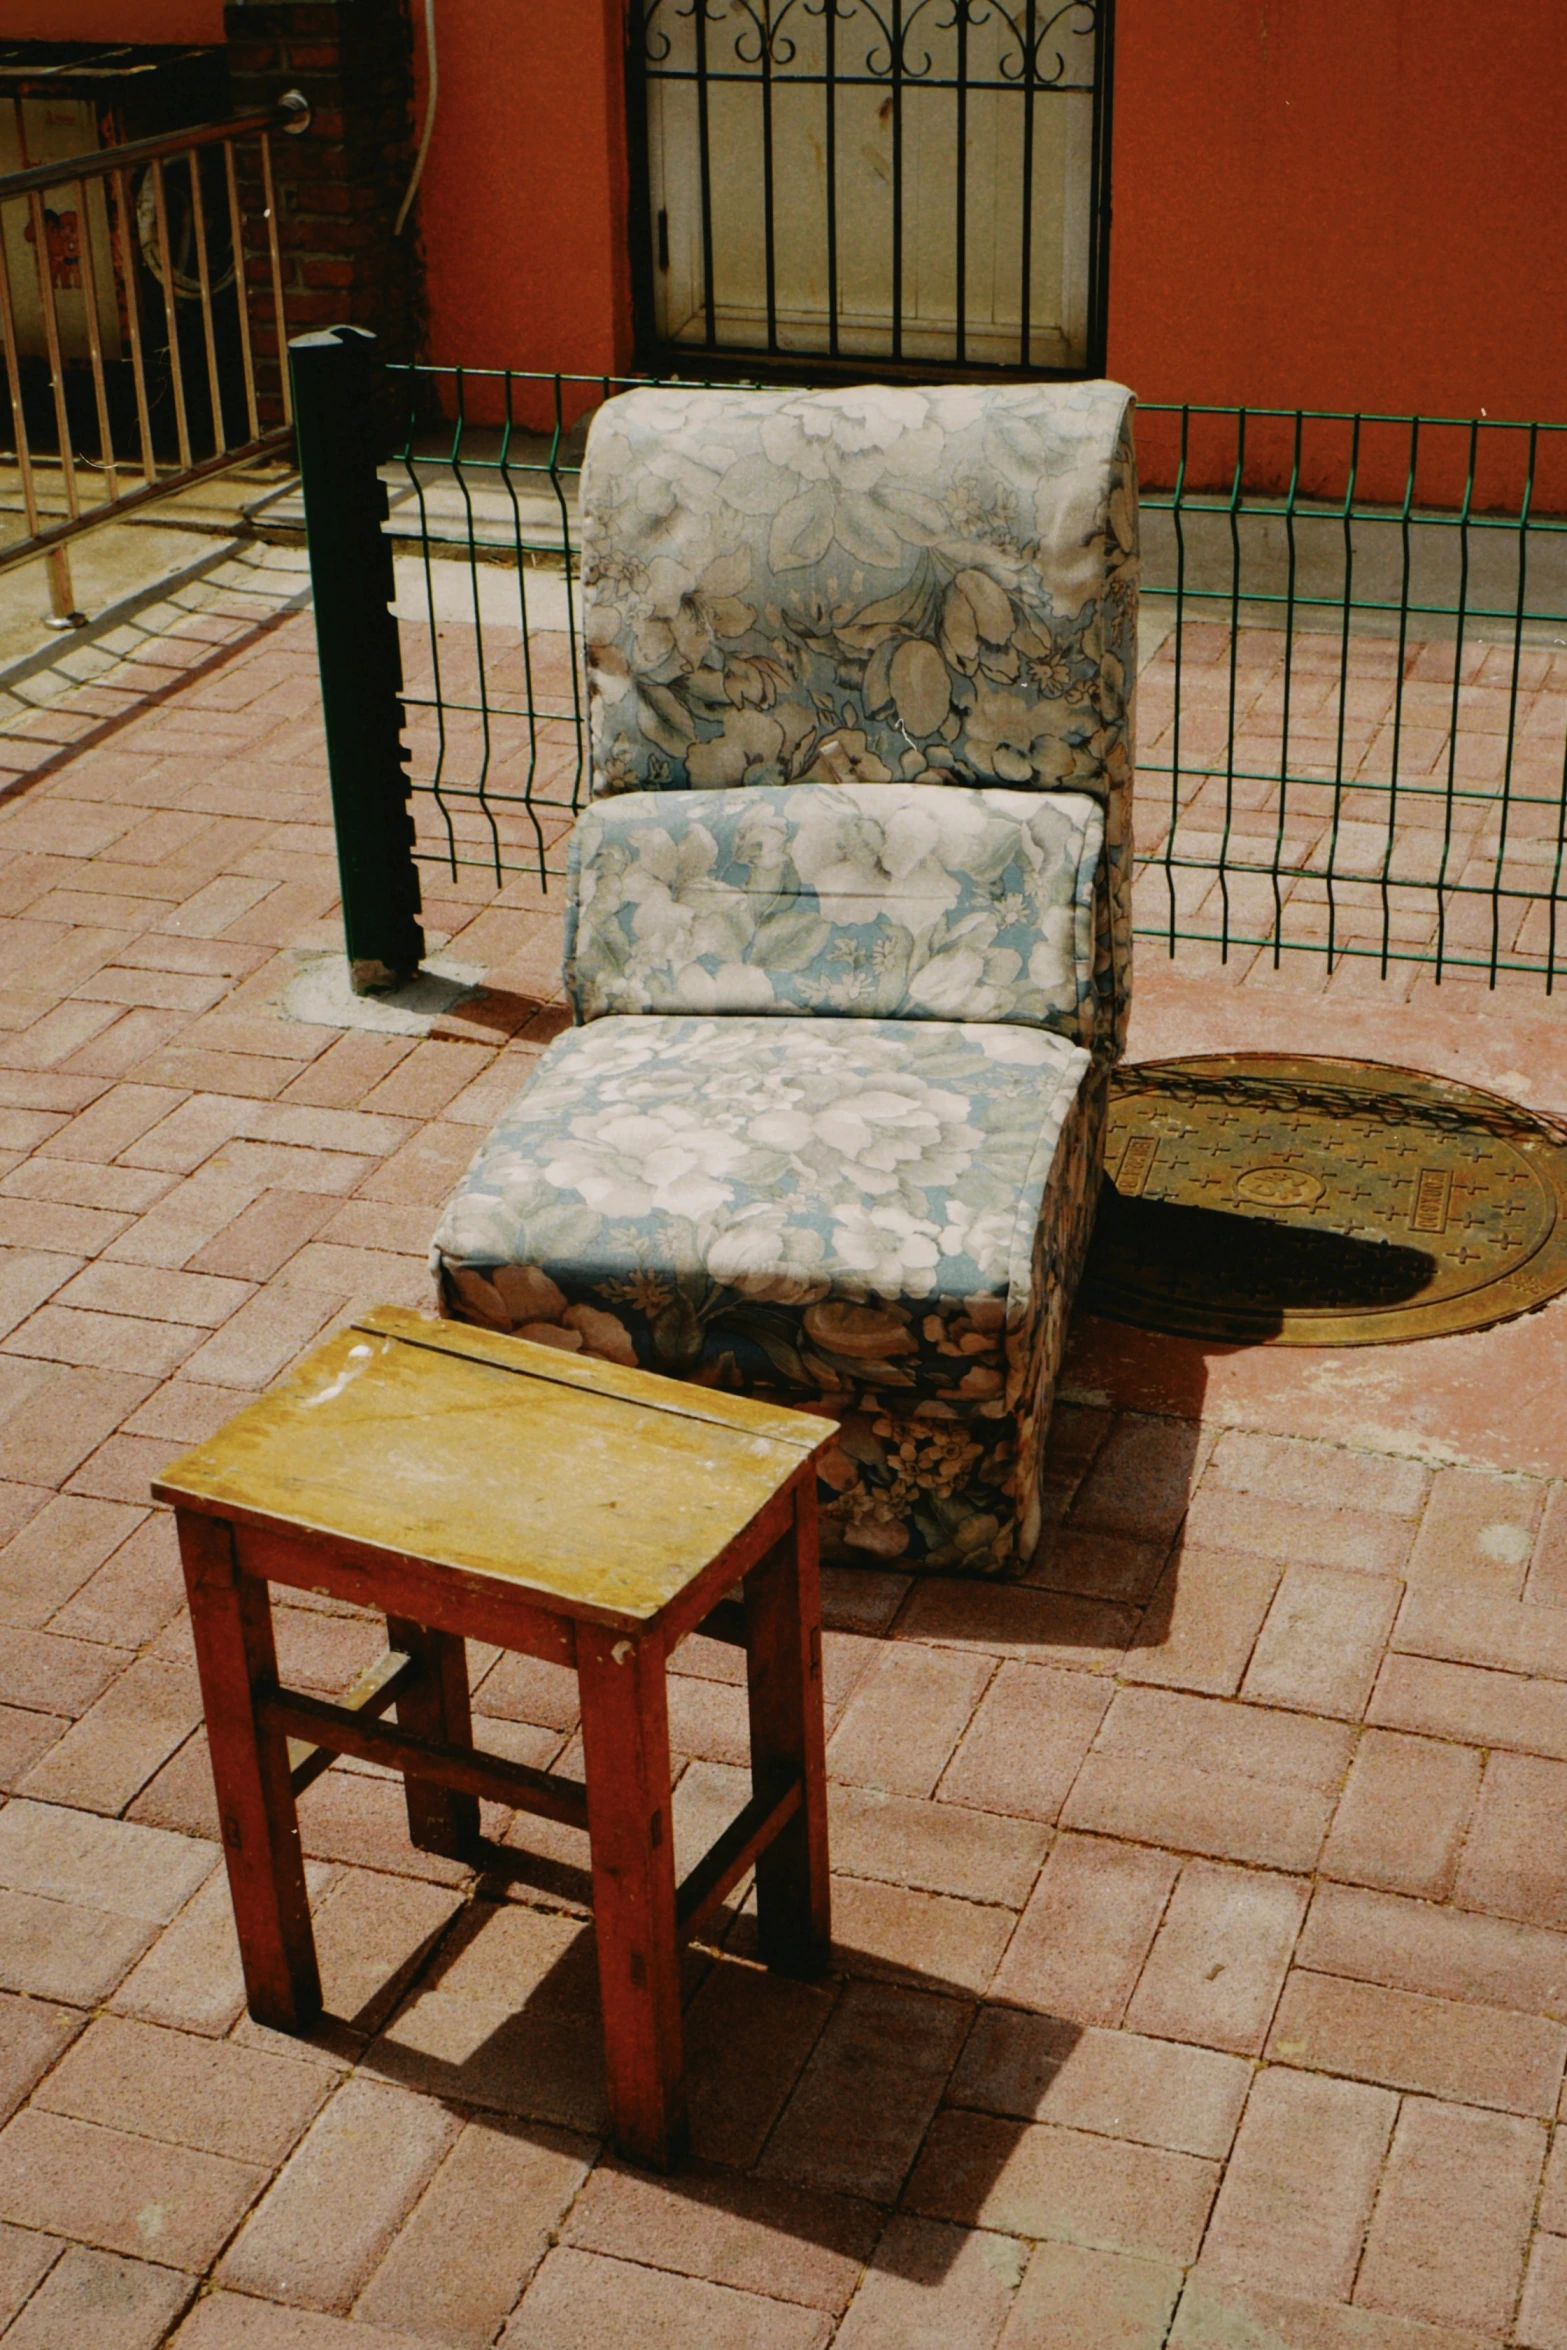 a chair sitting on top of a wooden table next to a foot stool